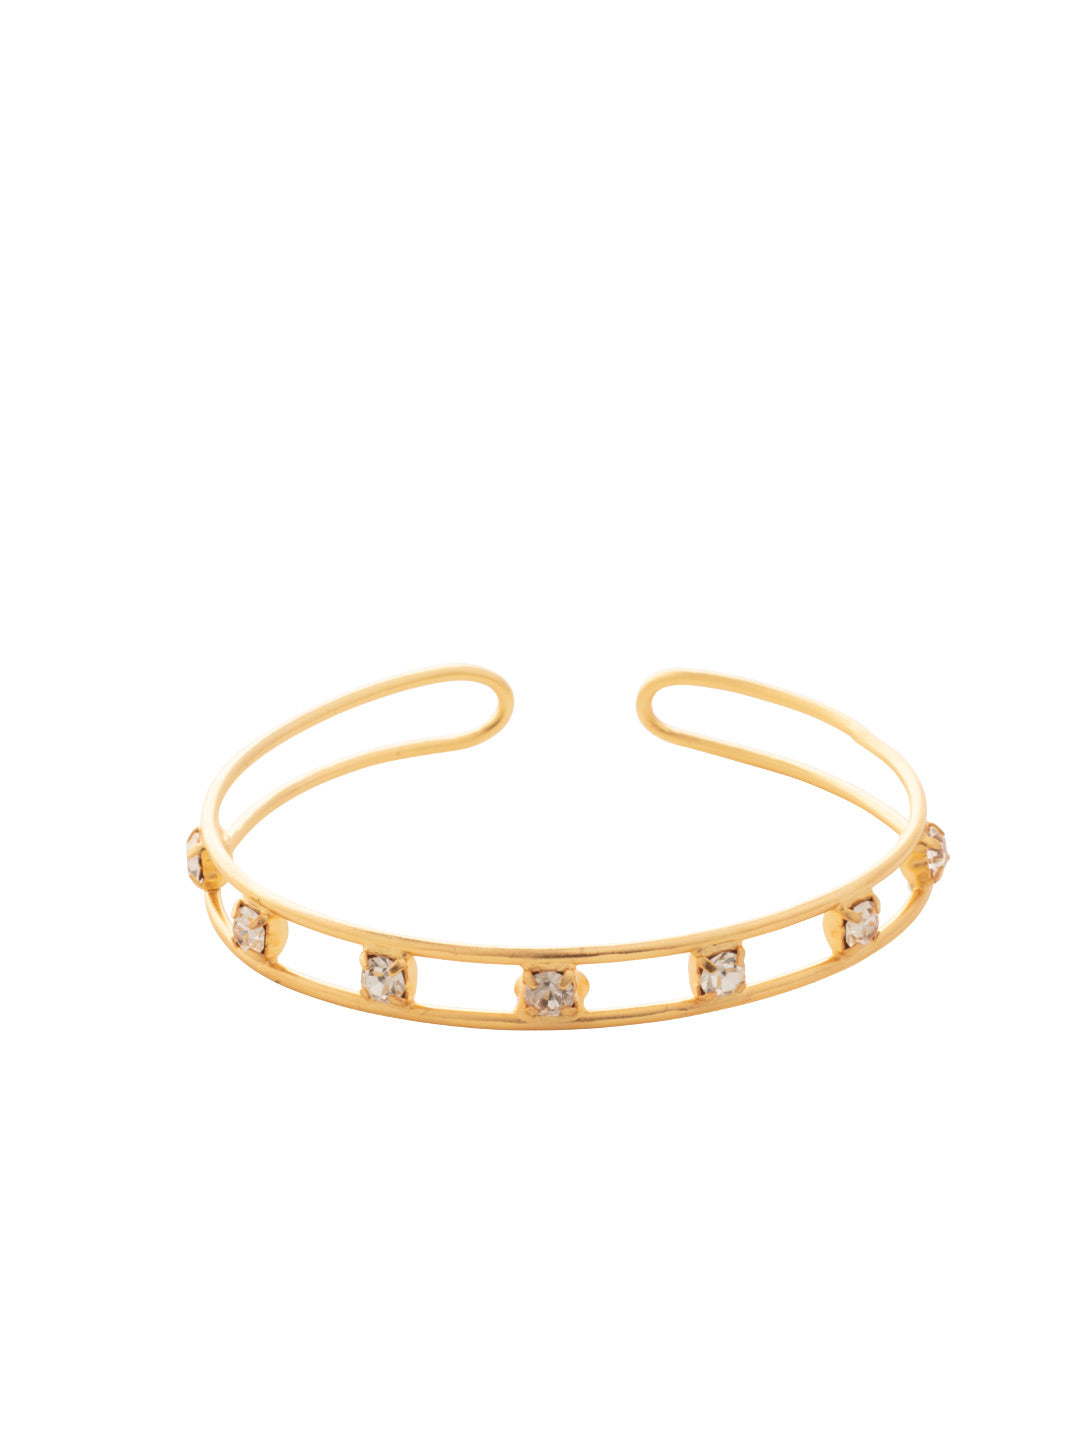 Aerie Cuff Bracelet - BFM6MGCRY - <p>The Aerie Cuff Bracelet features an open adjustable cuff band studded with round cut crystals. From Sorrelli's Crystal collection in our Matte Gold-tone finish.</p>